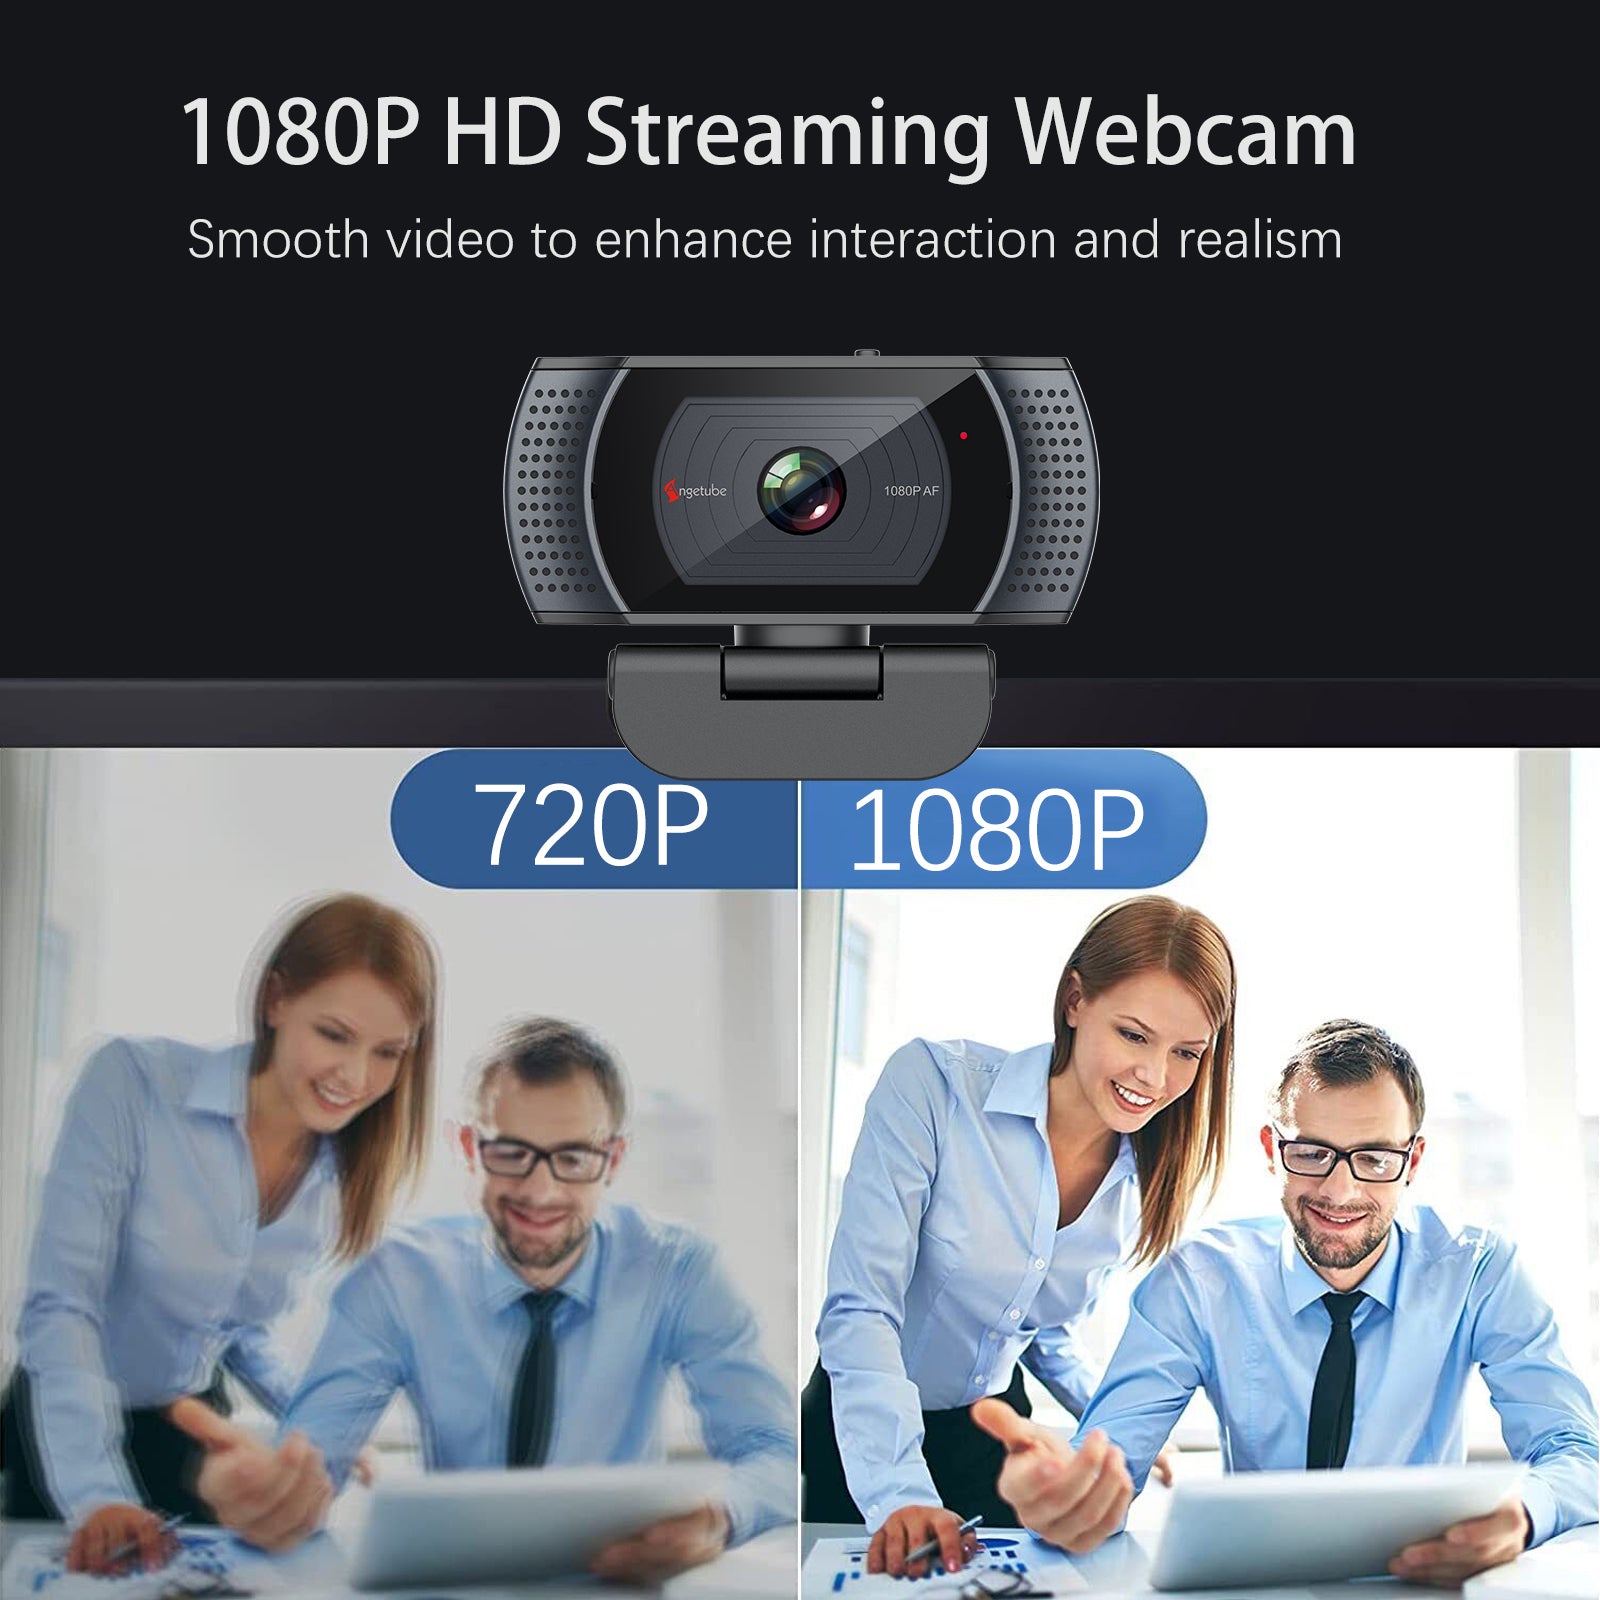 Angetube 1080P HD Webcam Built-in Privacy Cover